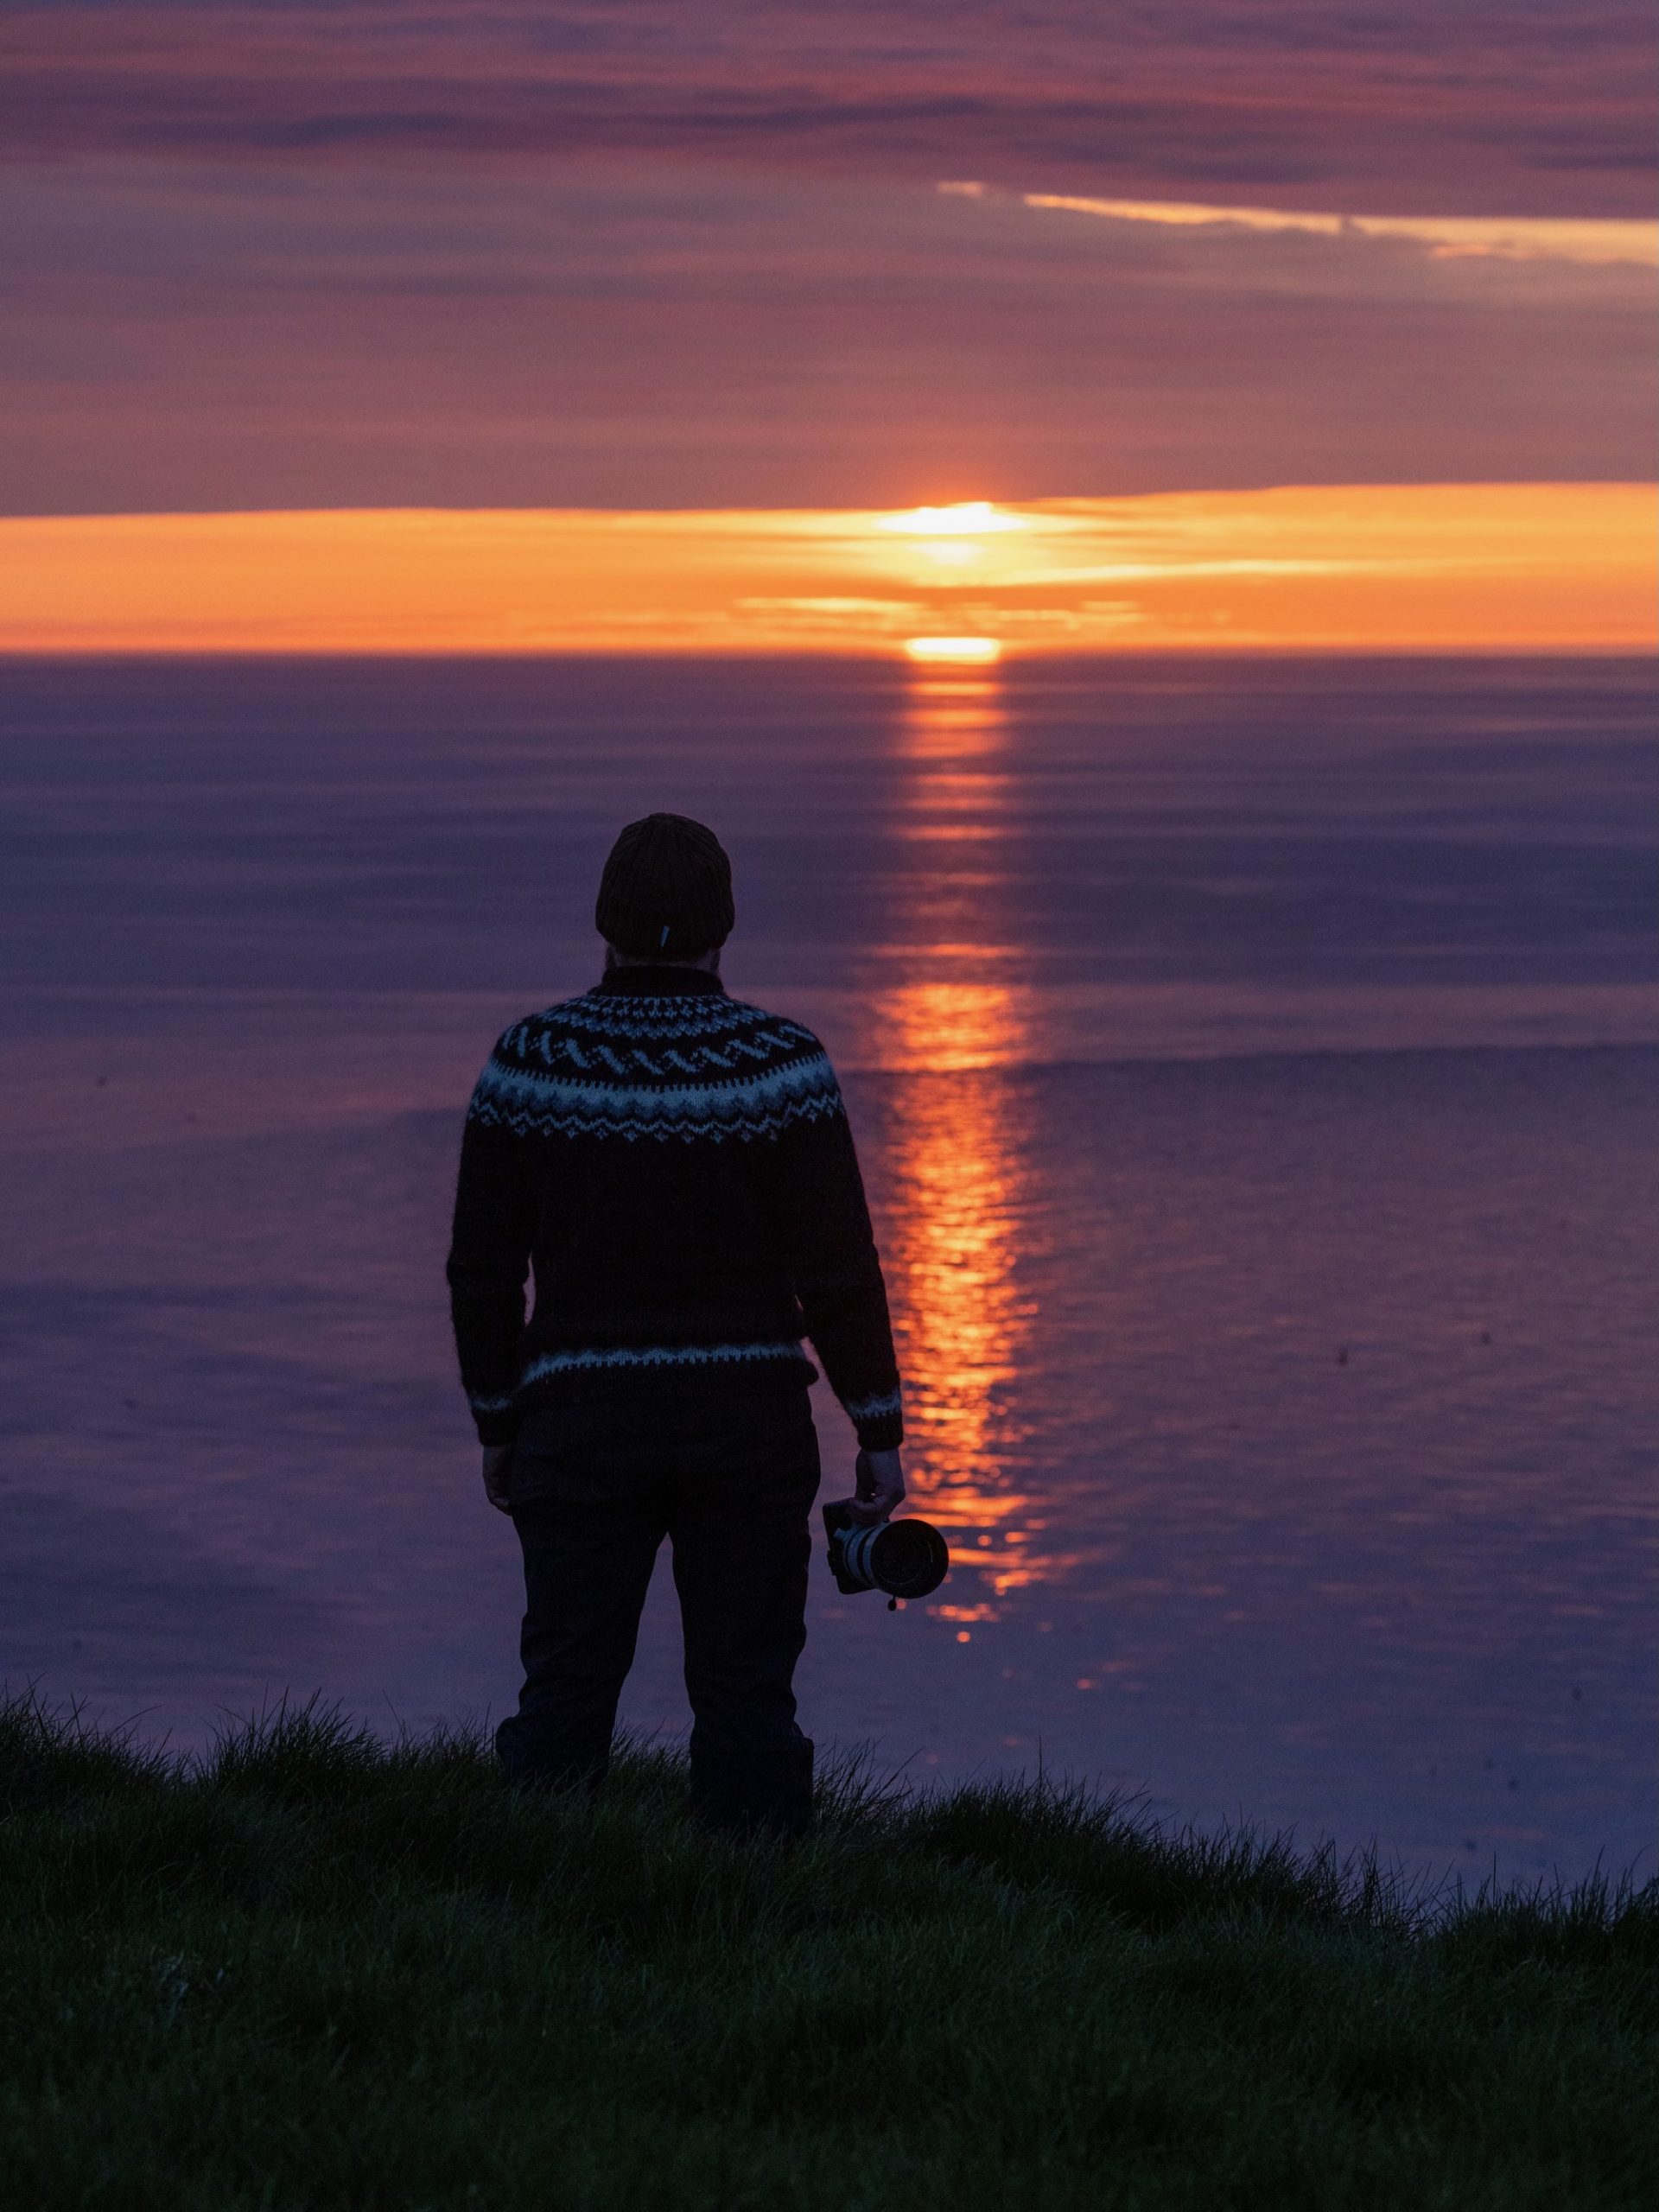 The midnight sun on a puffins photo workshop